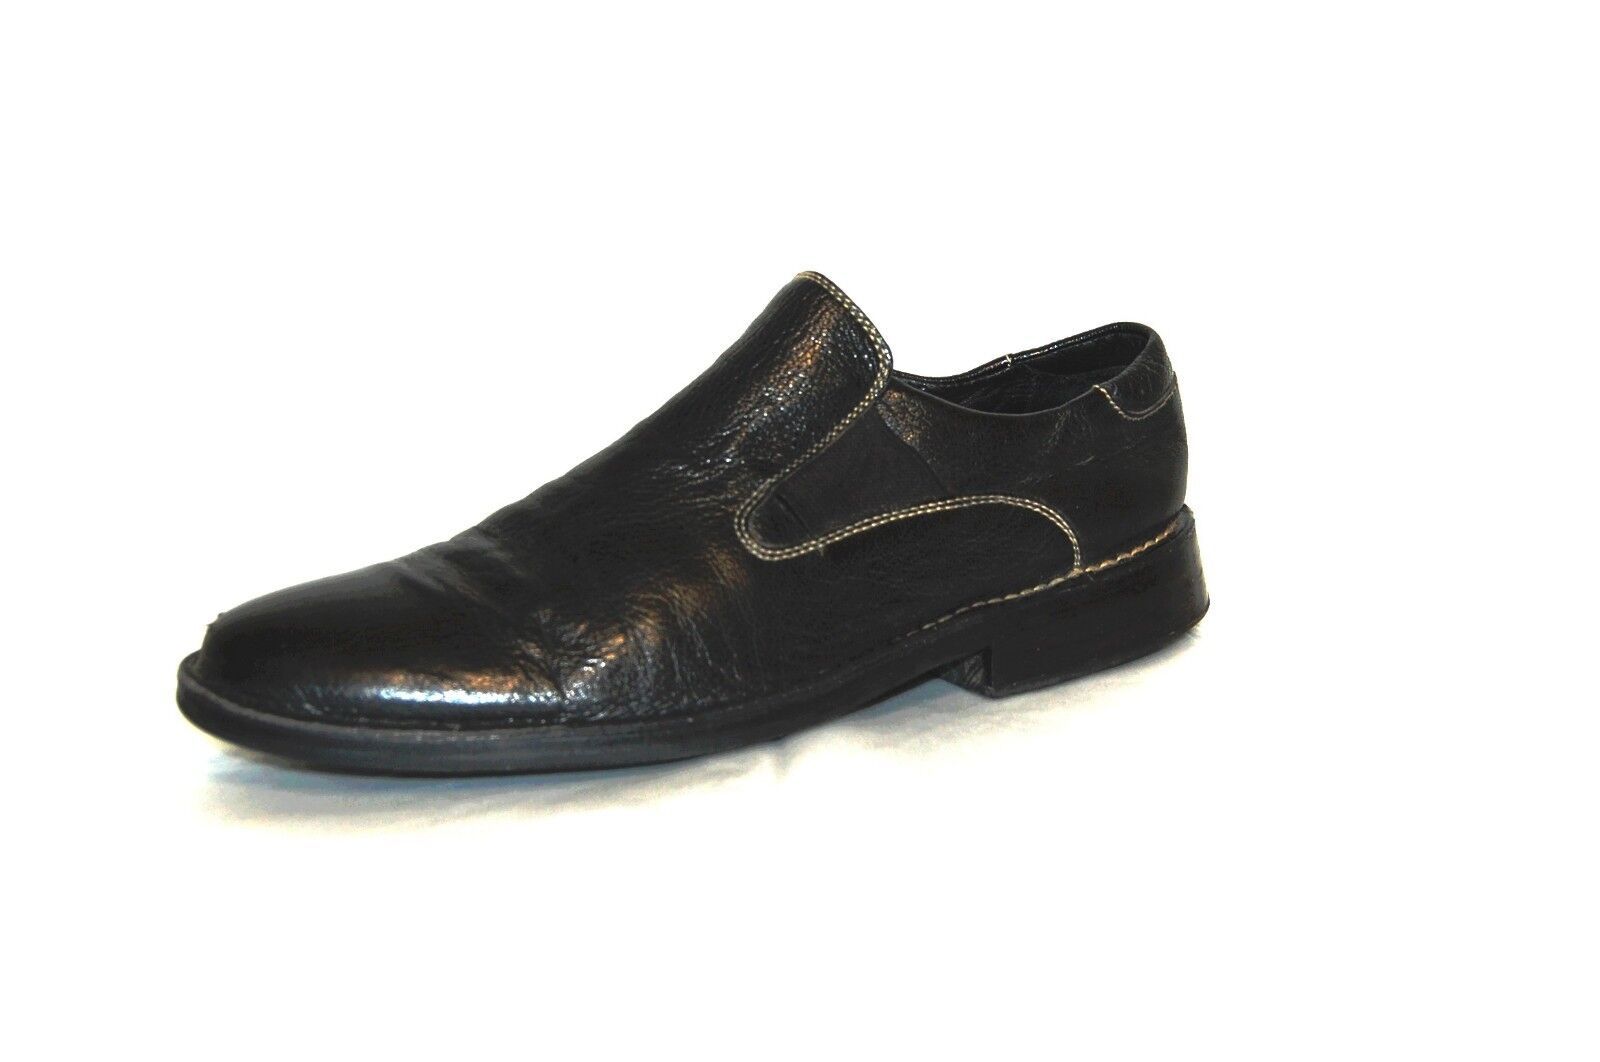 Cole Haan Men's Black Loafer Casual Stretch Shoes Size US 8.5 - $32.36